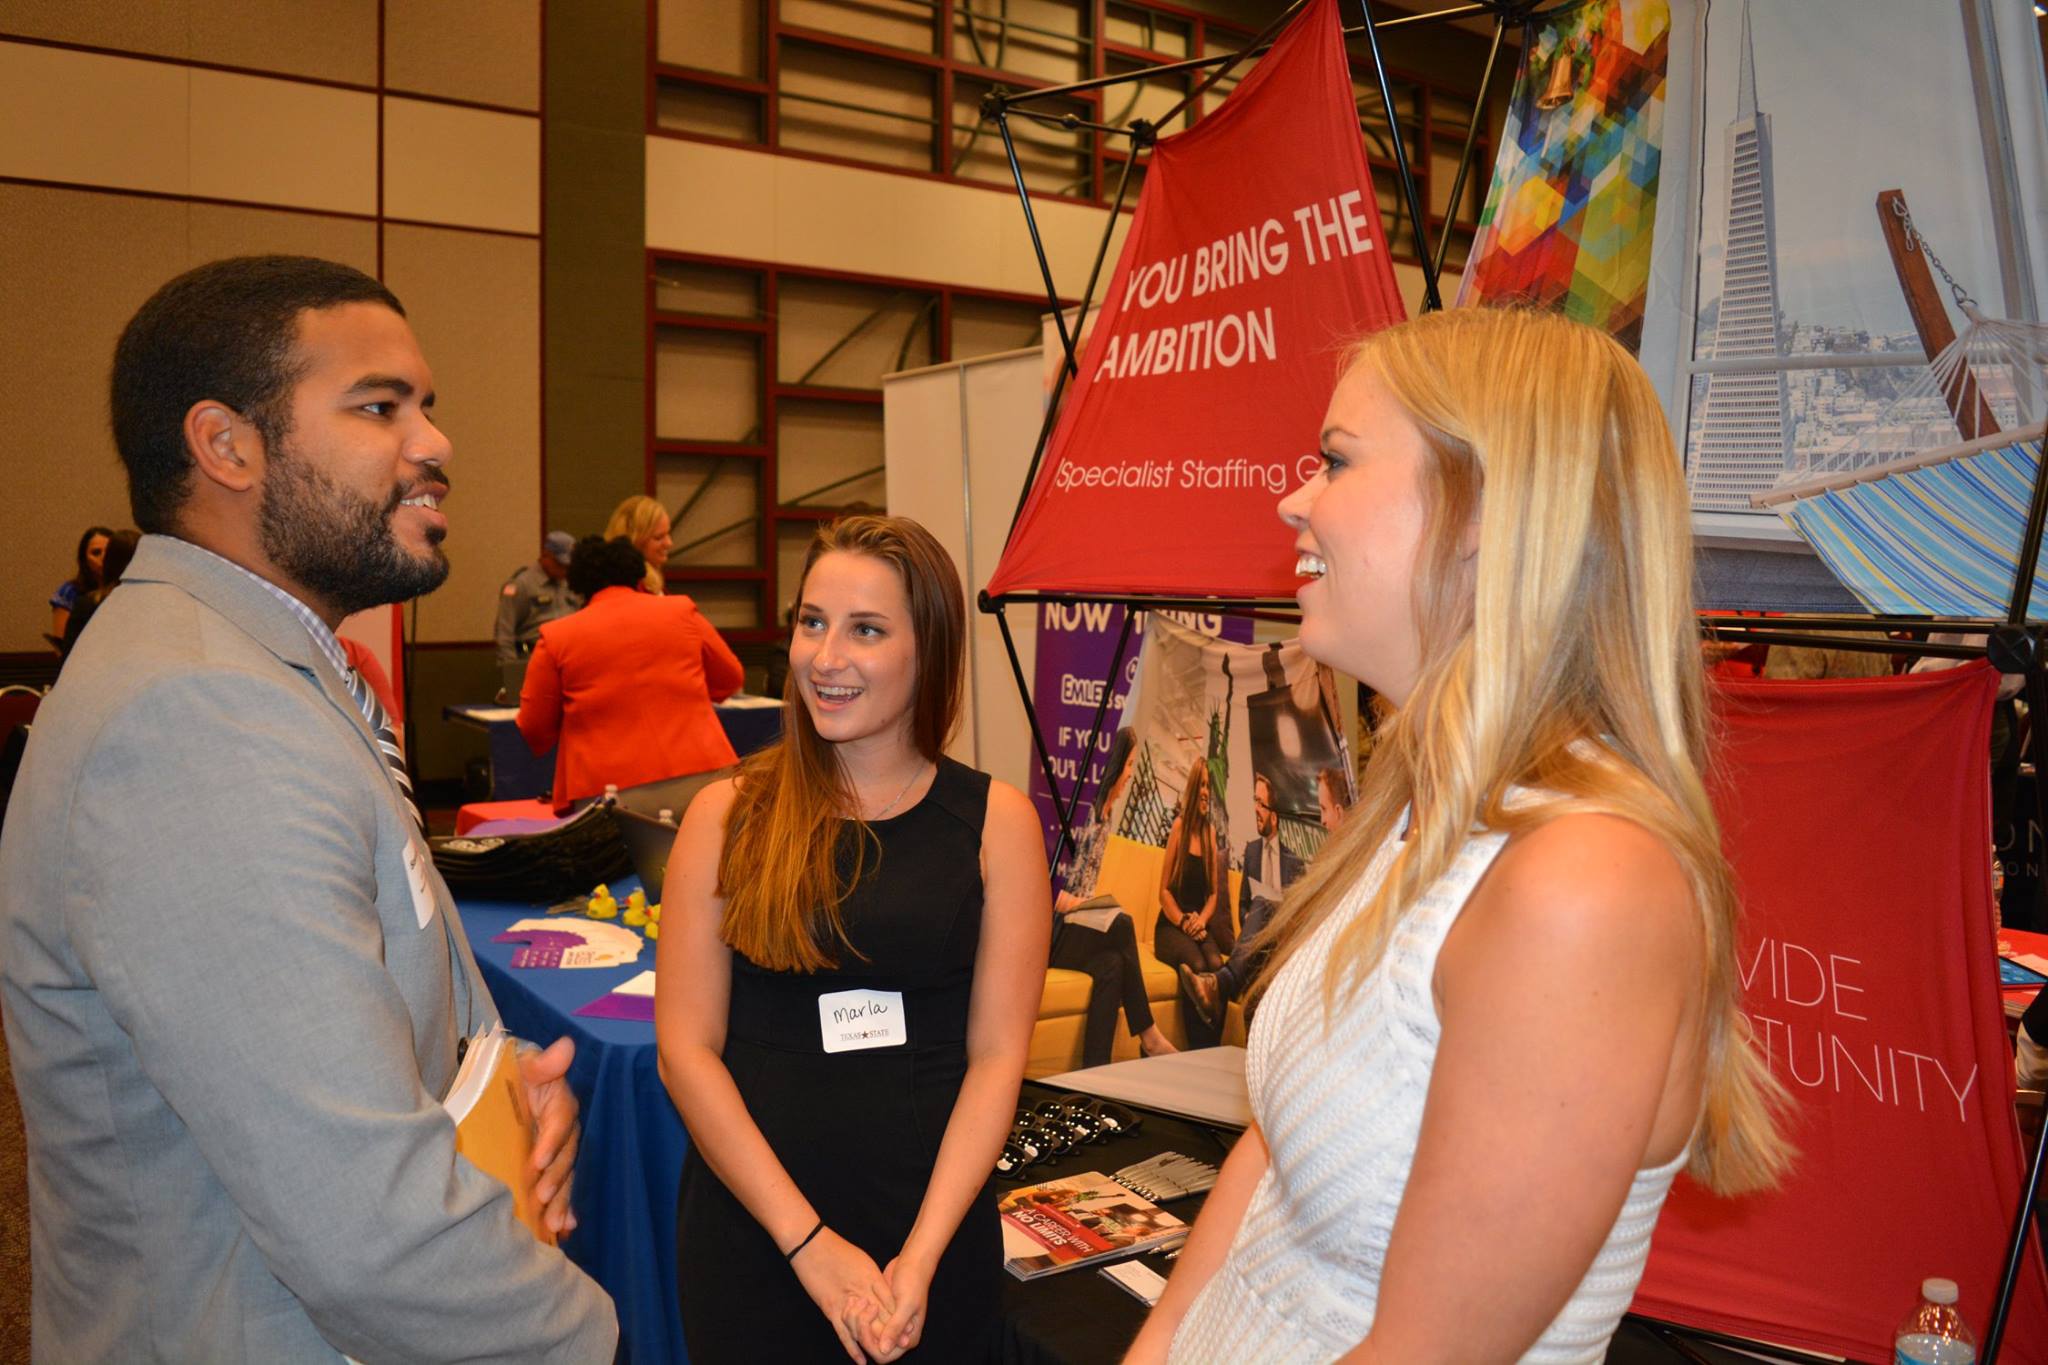 A student job seeking speaking to two recruiters at a career fair booth